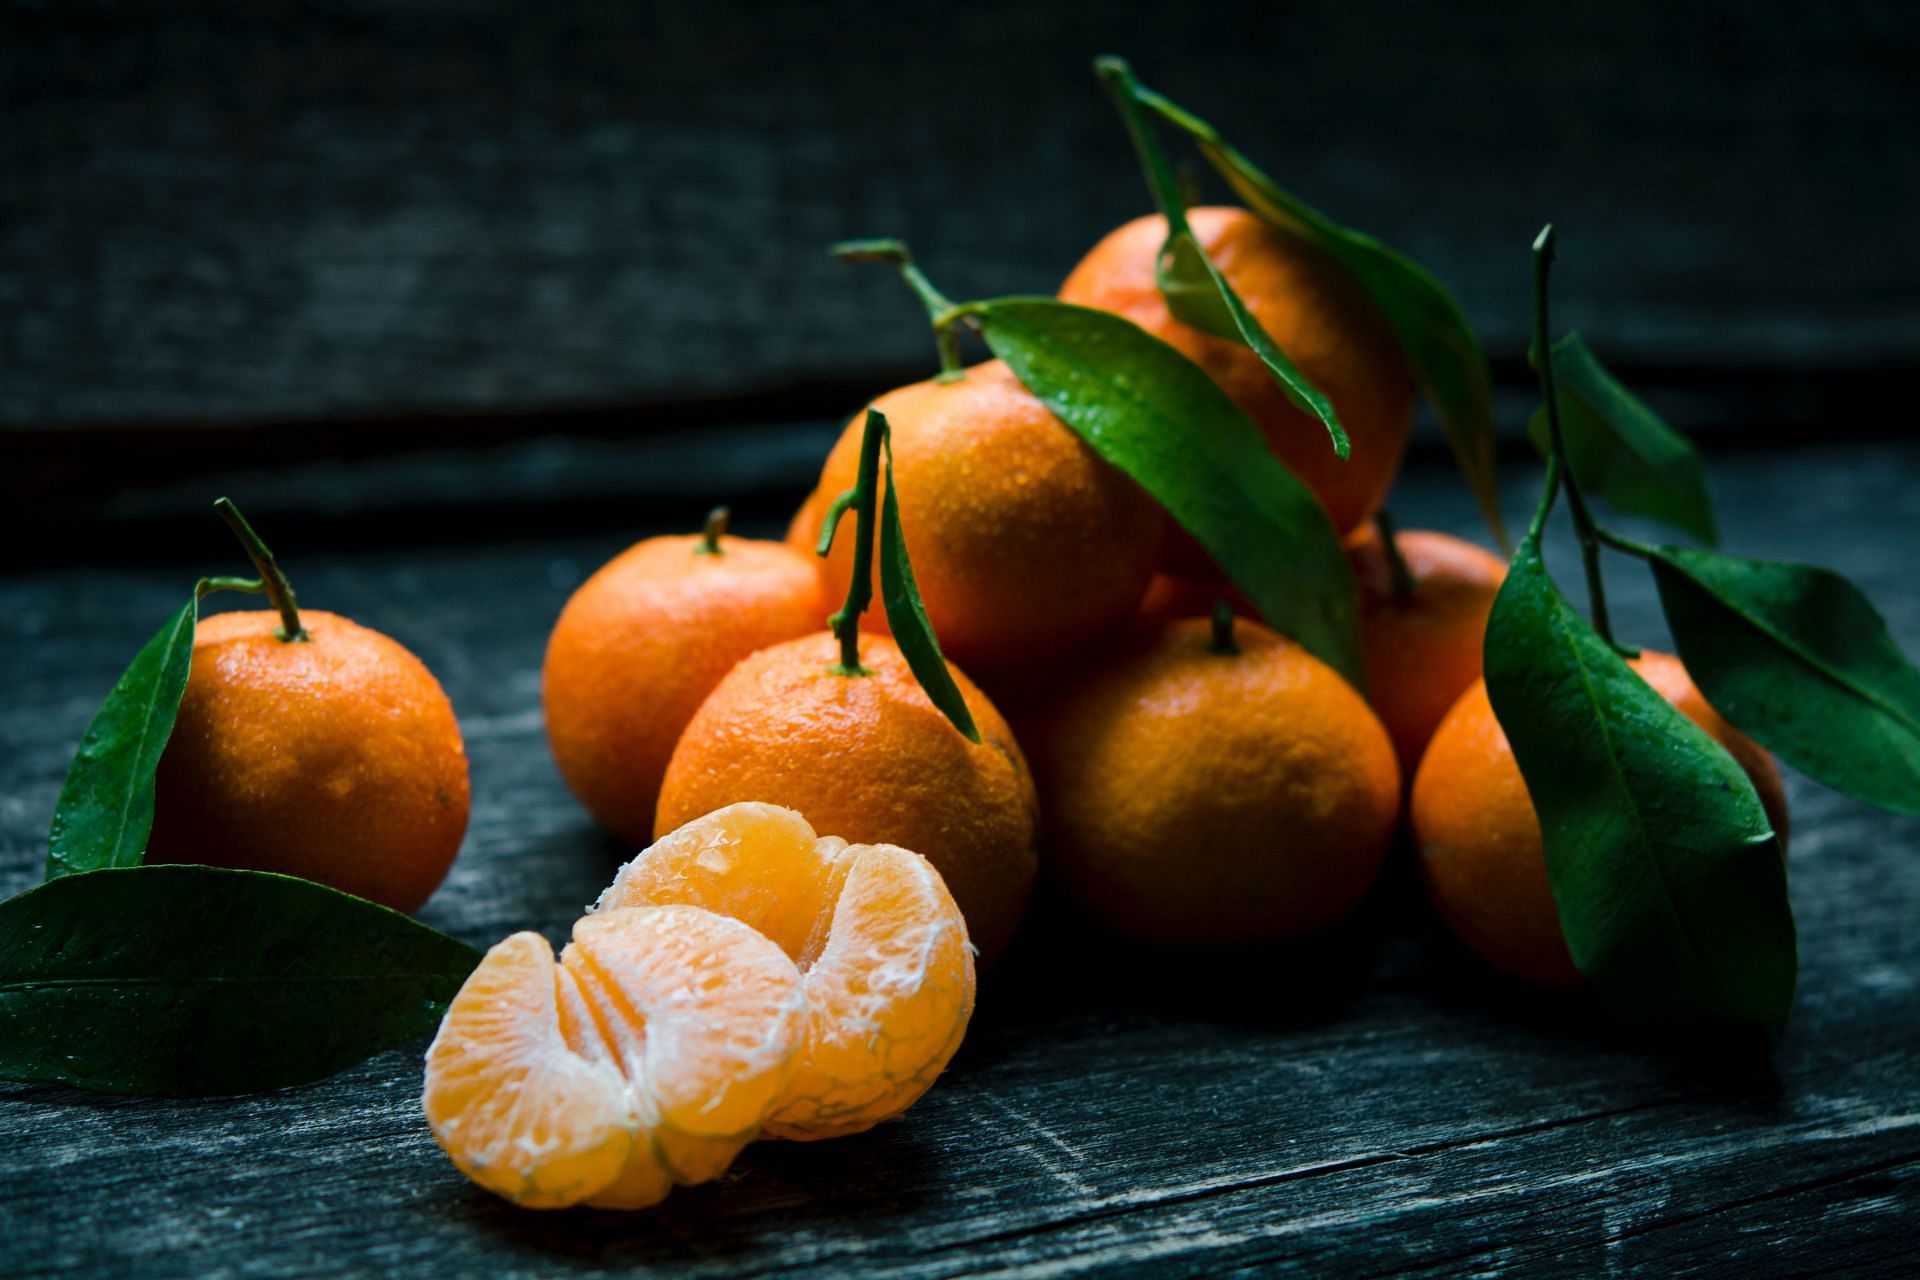 Vitamin C may aid in the protection of the body from oxidative stress. (Image via Unsplash/ Jonathan Pielmayer)